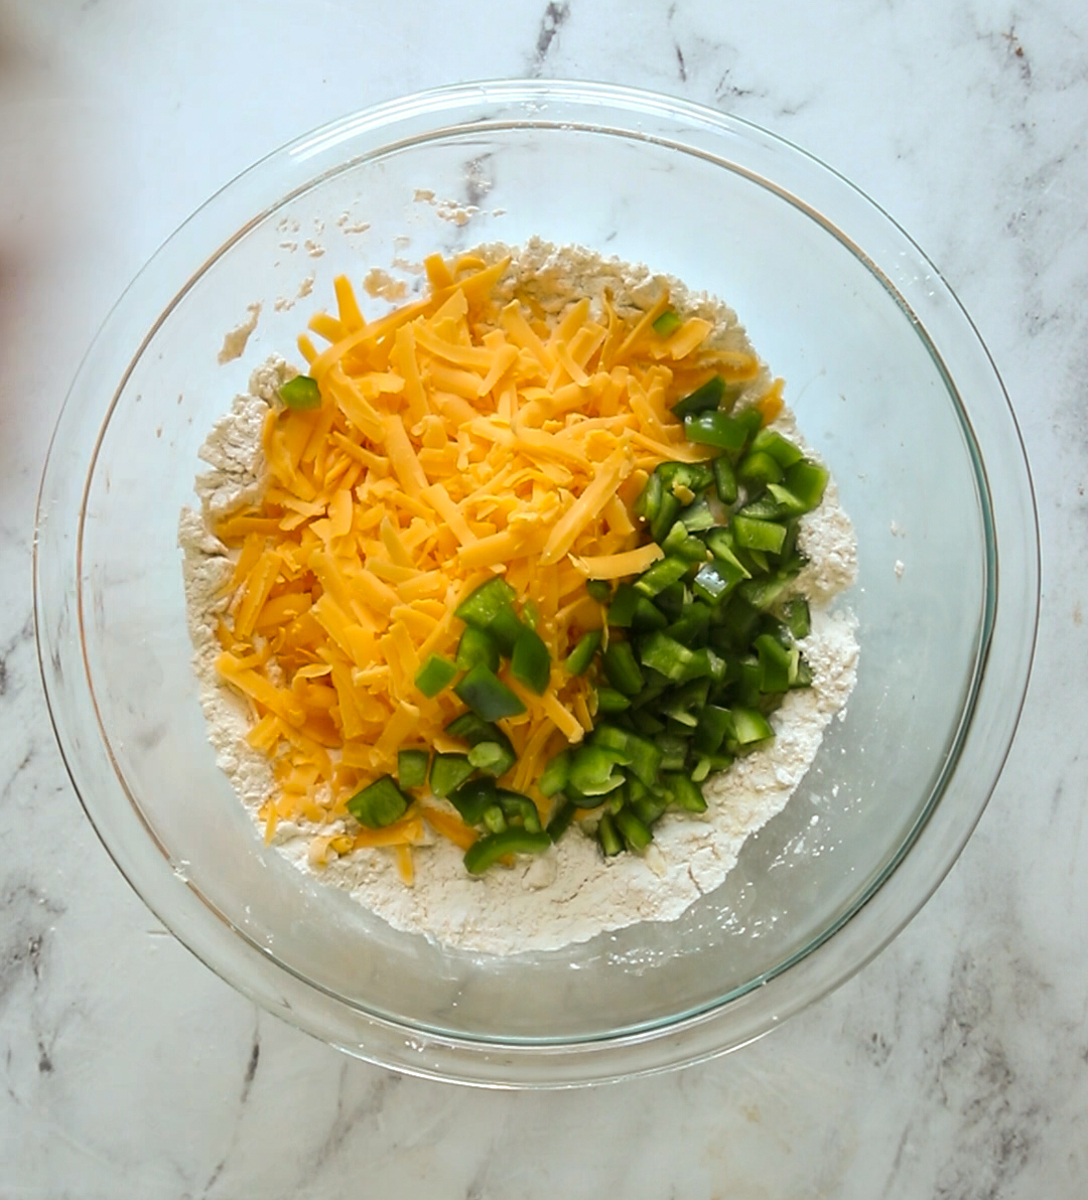 cheddar cheese and jalapenos diced into bowl